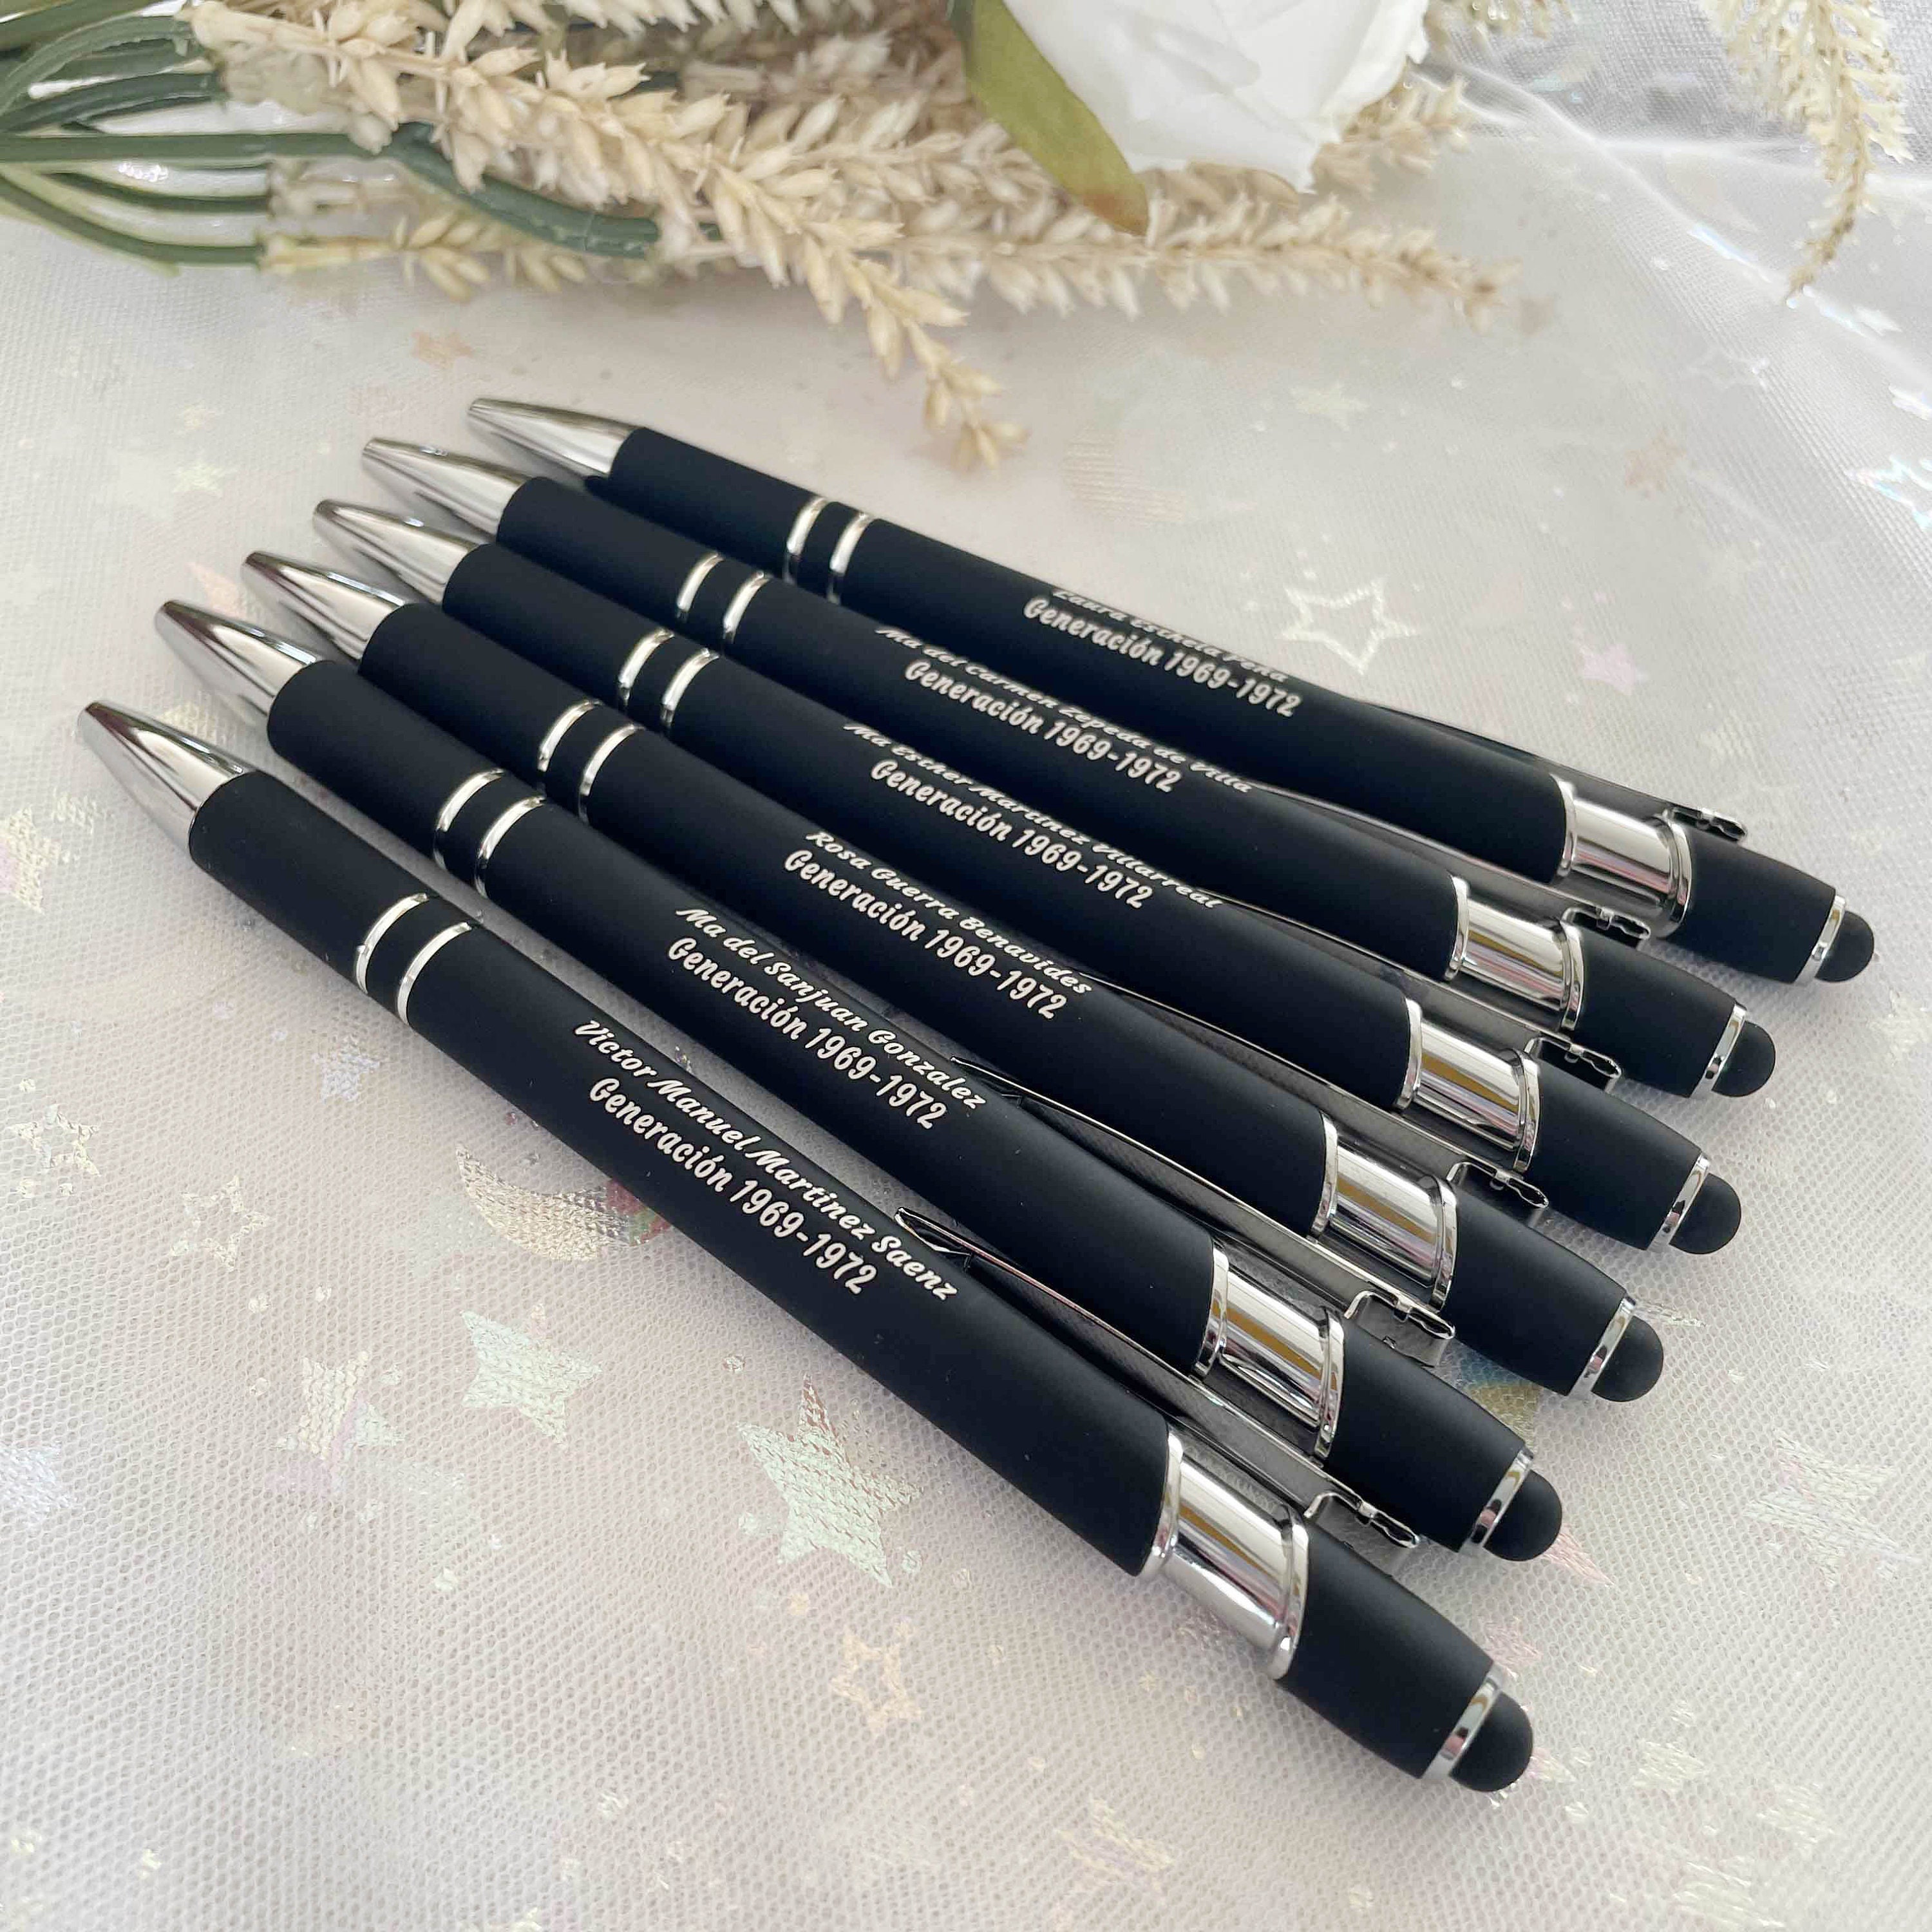  QNTYCT Custom ballpoint pen, personalized ballpoint pen with  name, soft-touch ballpoint pen, best pen for Christmas, graduation,  anniversary, office, smooth writing-12 pc : Office Products